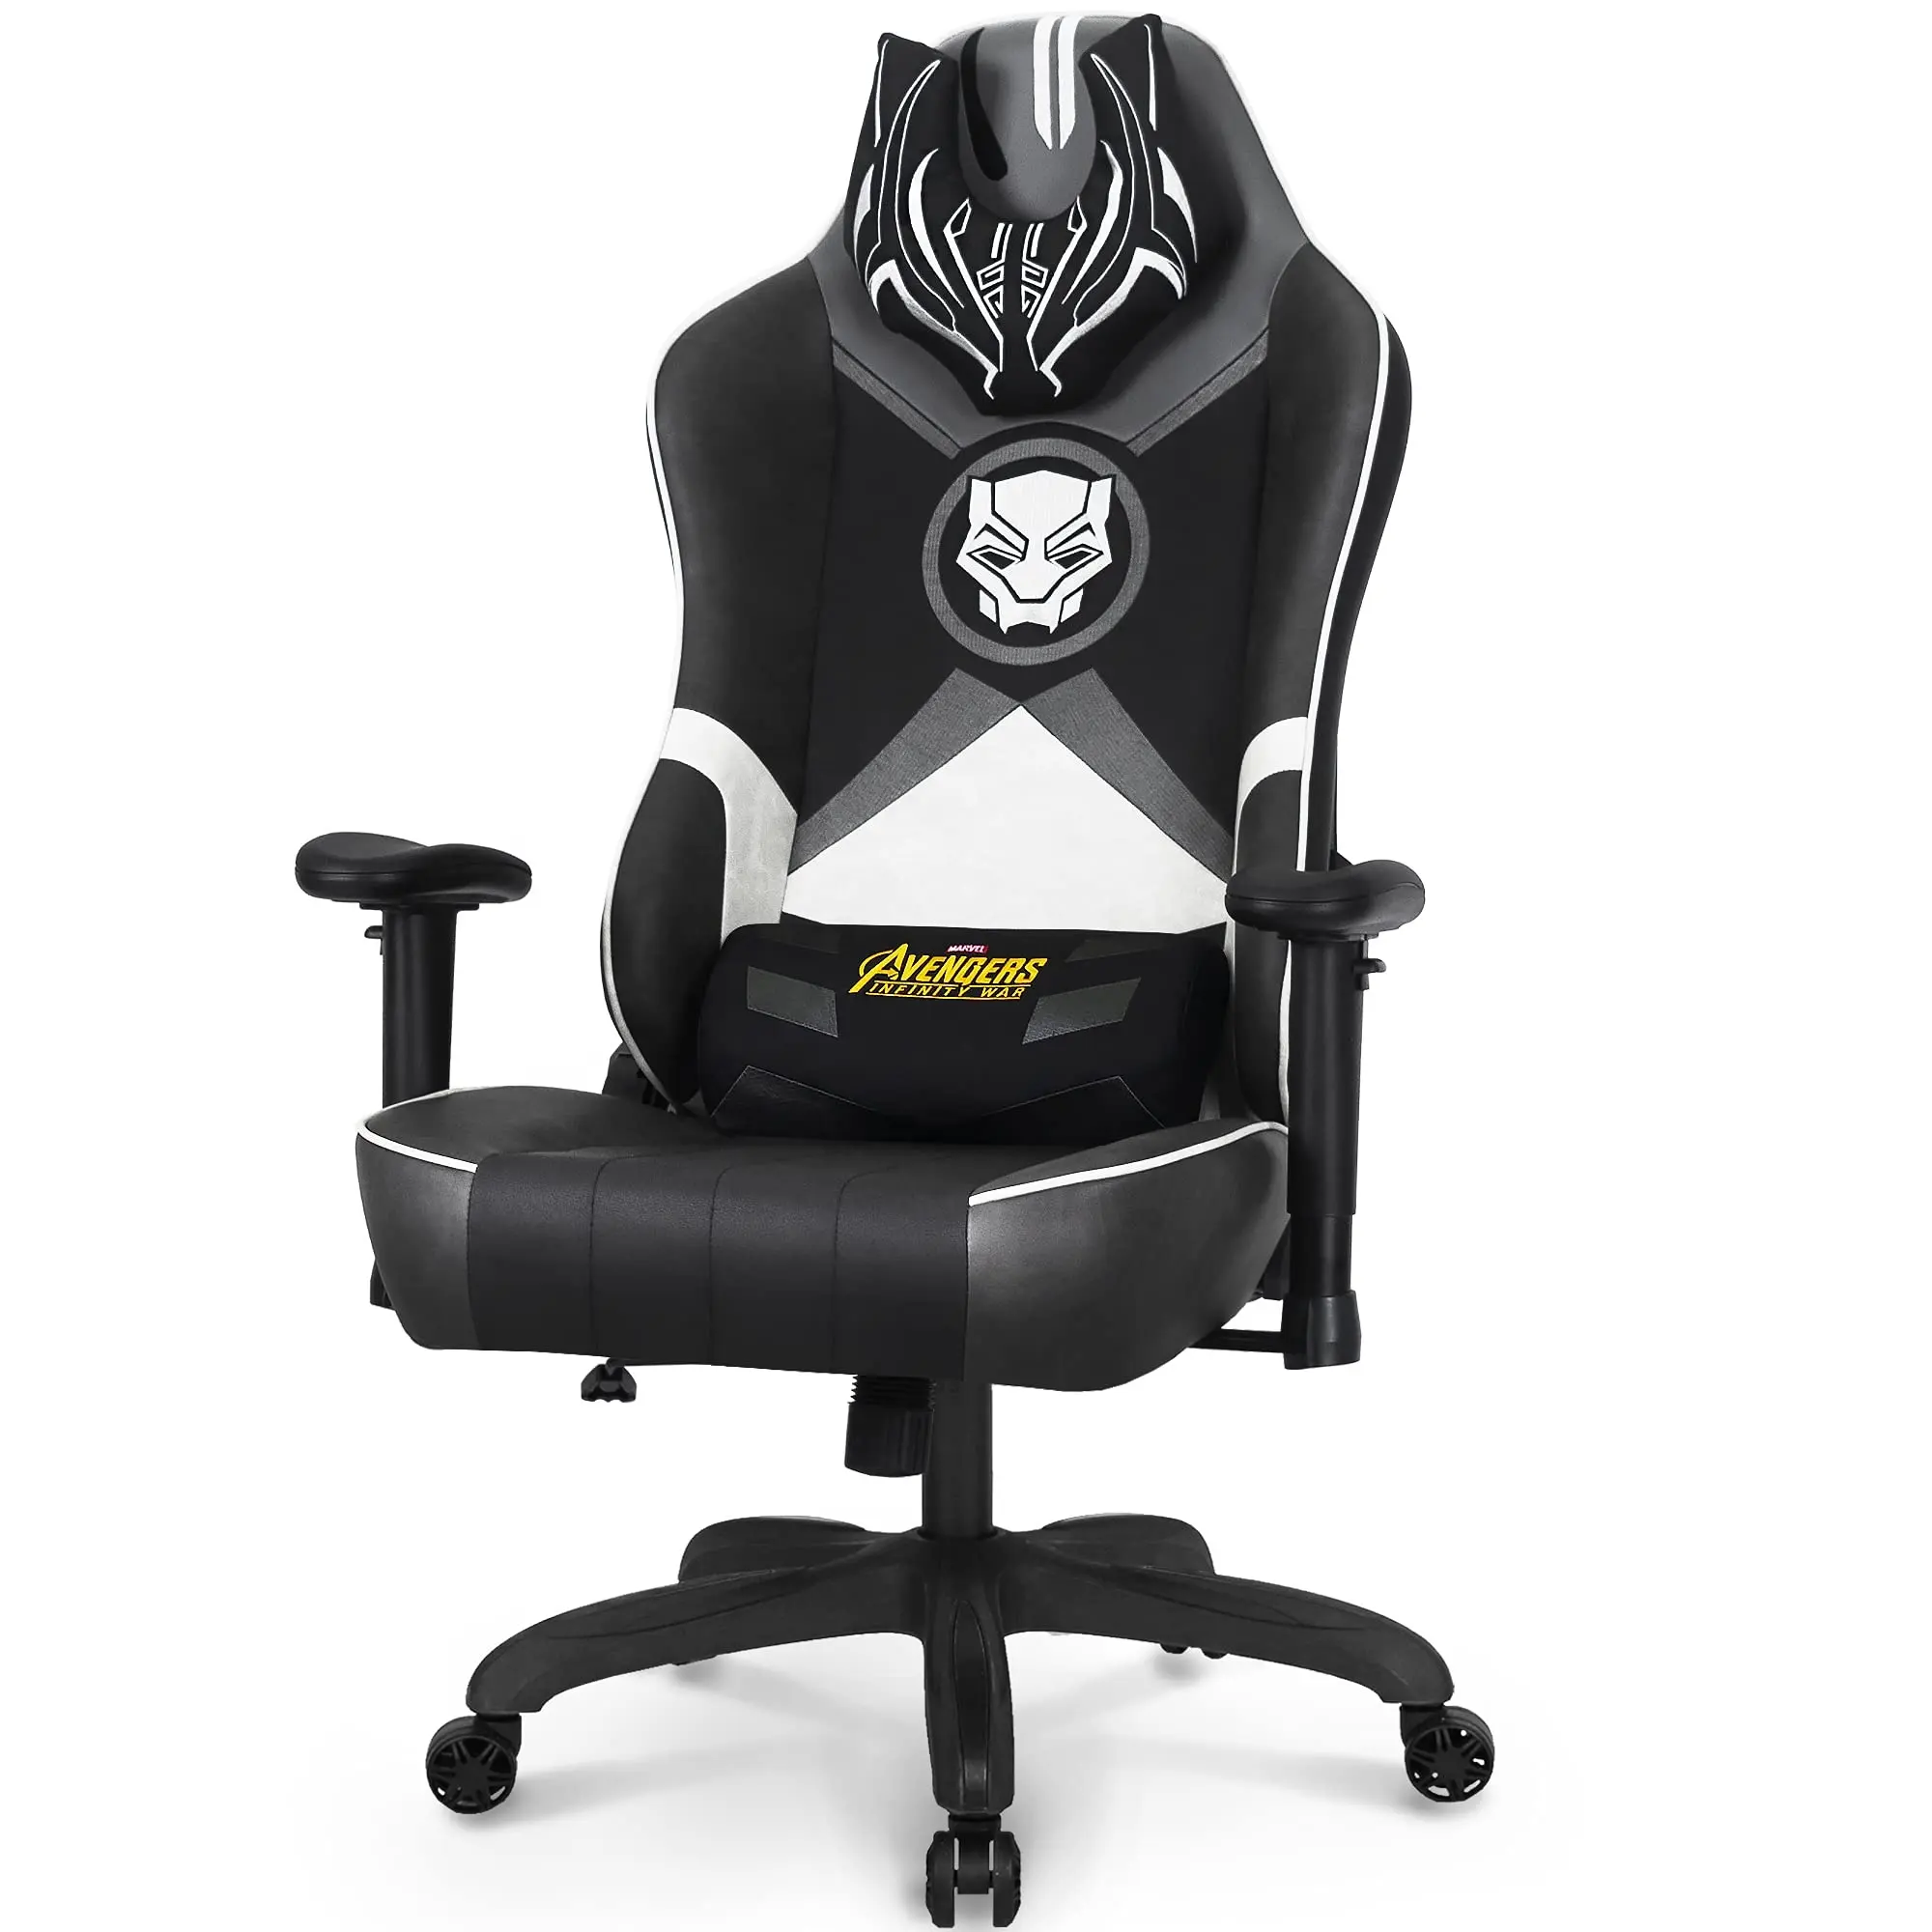 Marvel Avengers 2023 Swivel Gaming Chair Full-metal dual- wheel casters PC gamer chair Hybrid Leather 165 recline Gaming chair